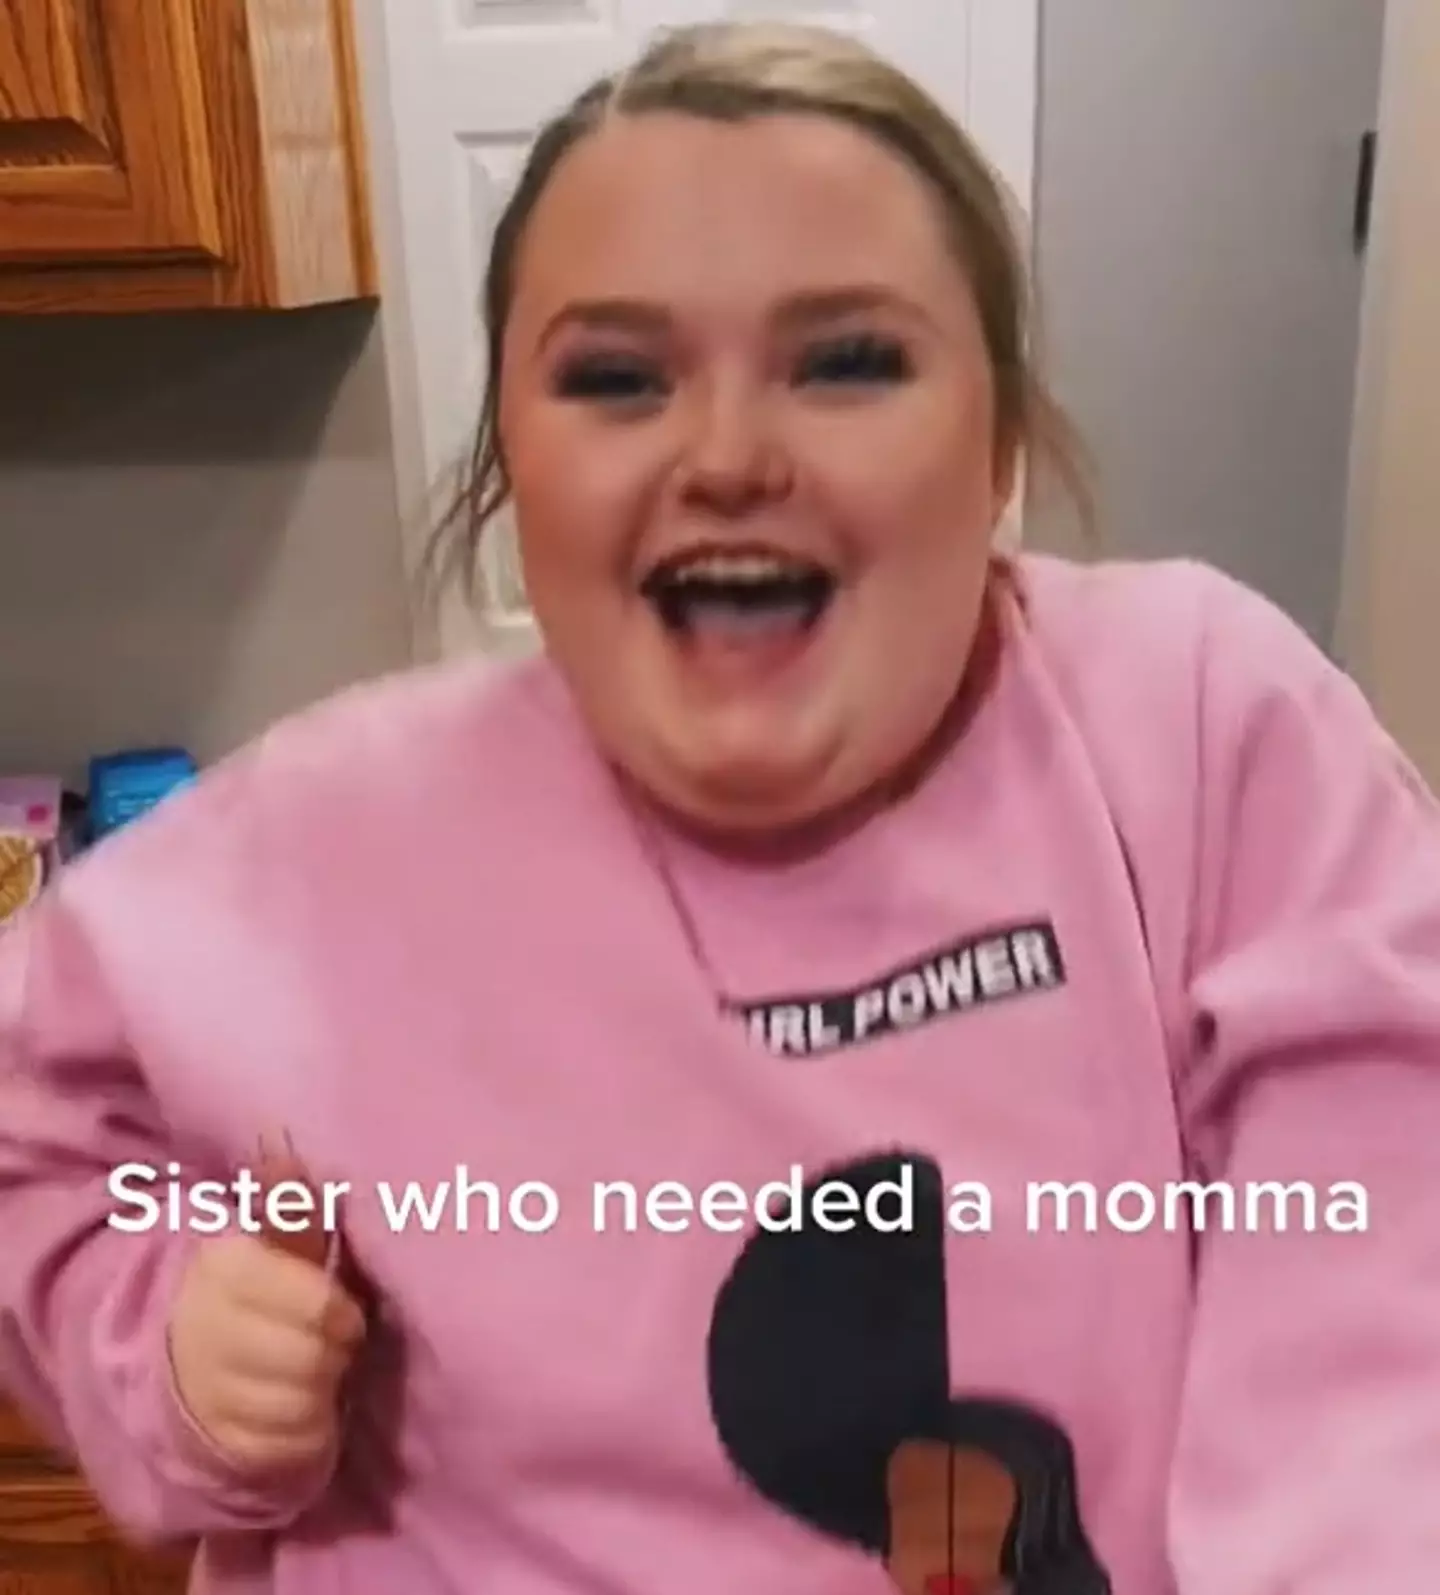 Honey Boo Boo, real name Alana, called herself a 'sister who needed a momma'.